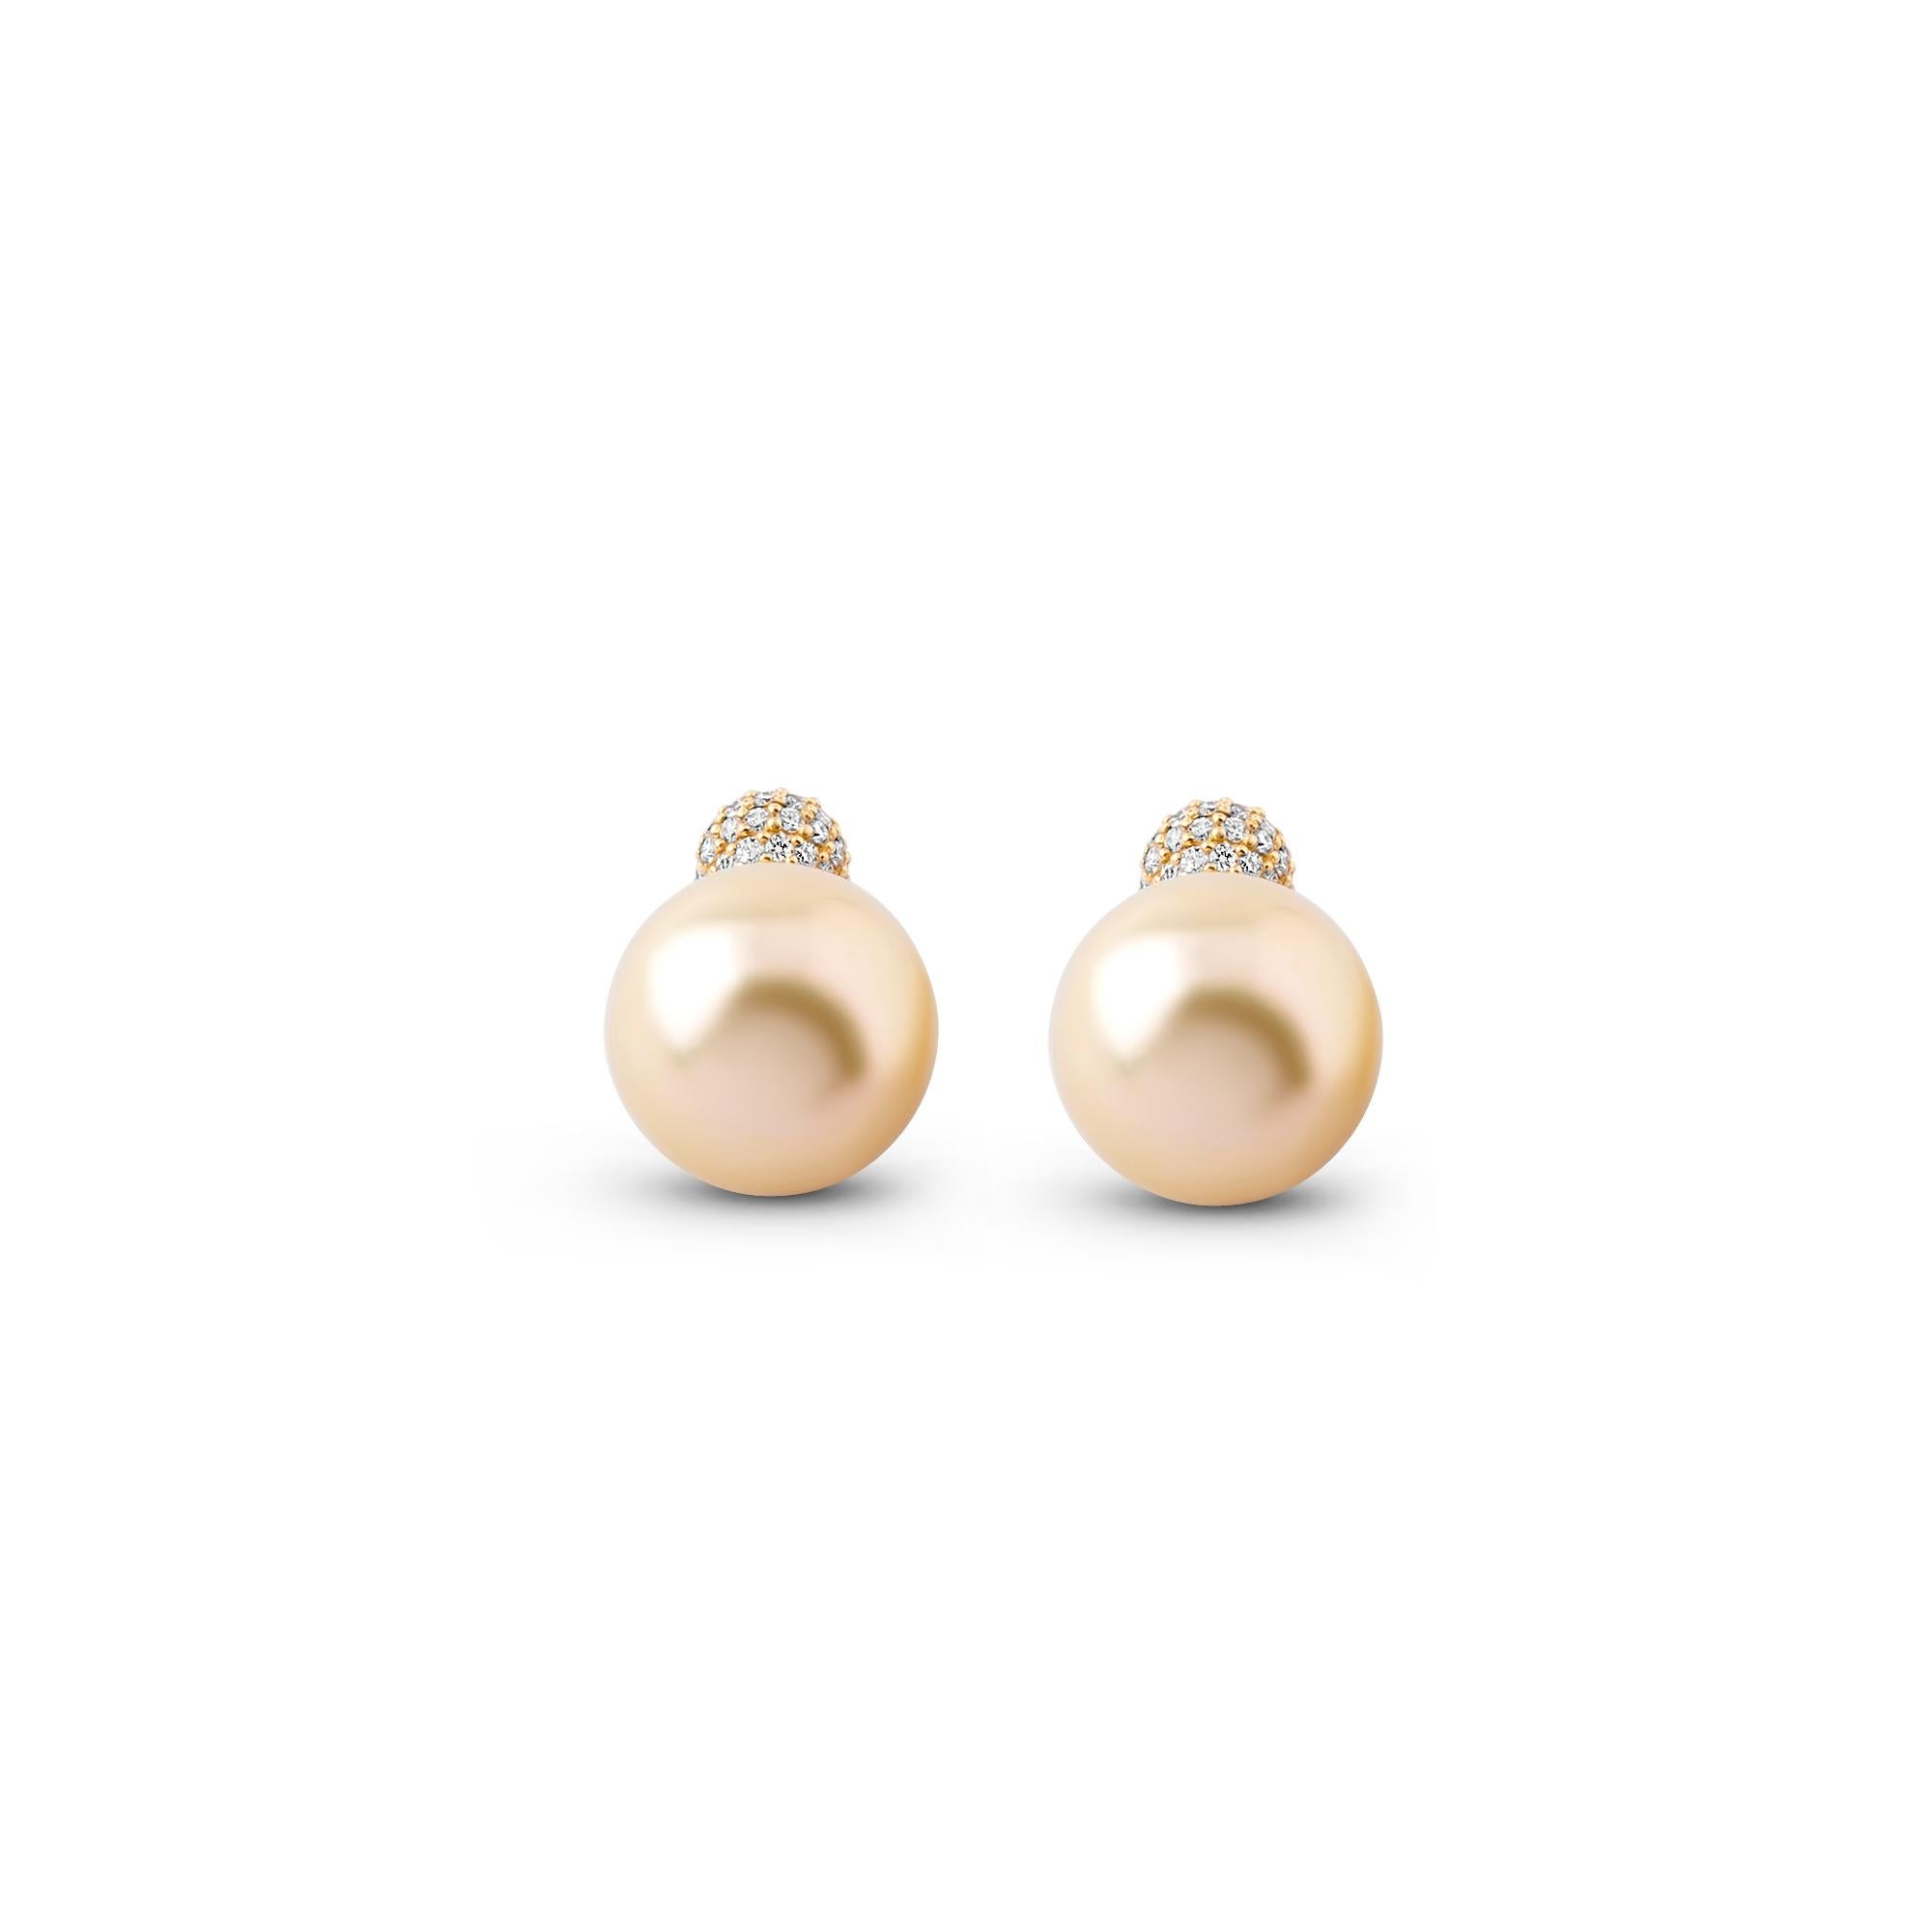 These earrings are our take on the classic Dior Tribales Ball earrings. These 1.5 cm diameter South Sea Pearls sit under the earlobe white the diamond studded gold ball sits in front. The diamond ball is 8mm in diameter. The materials used in these